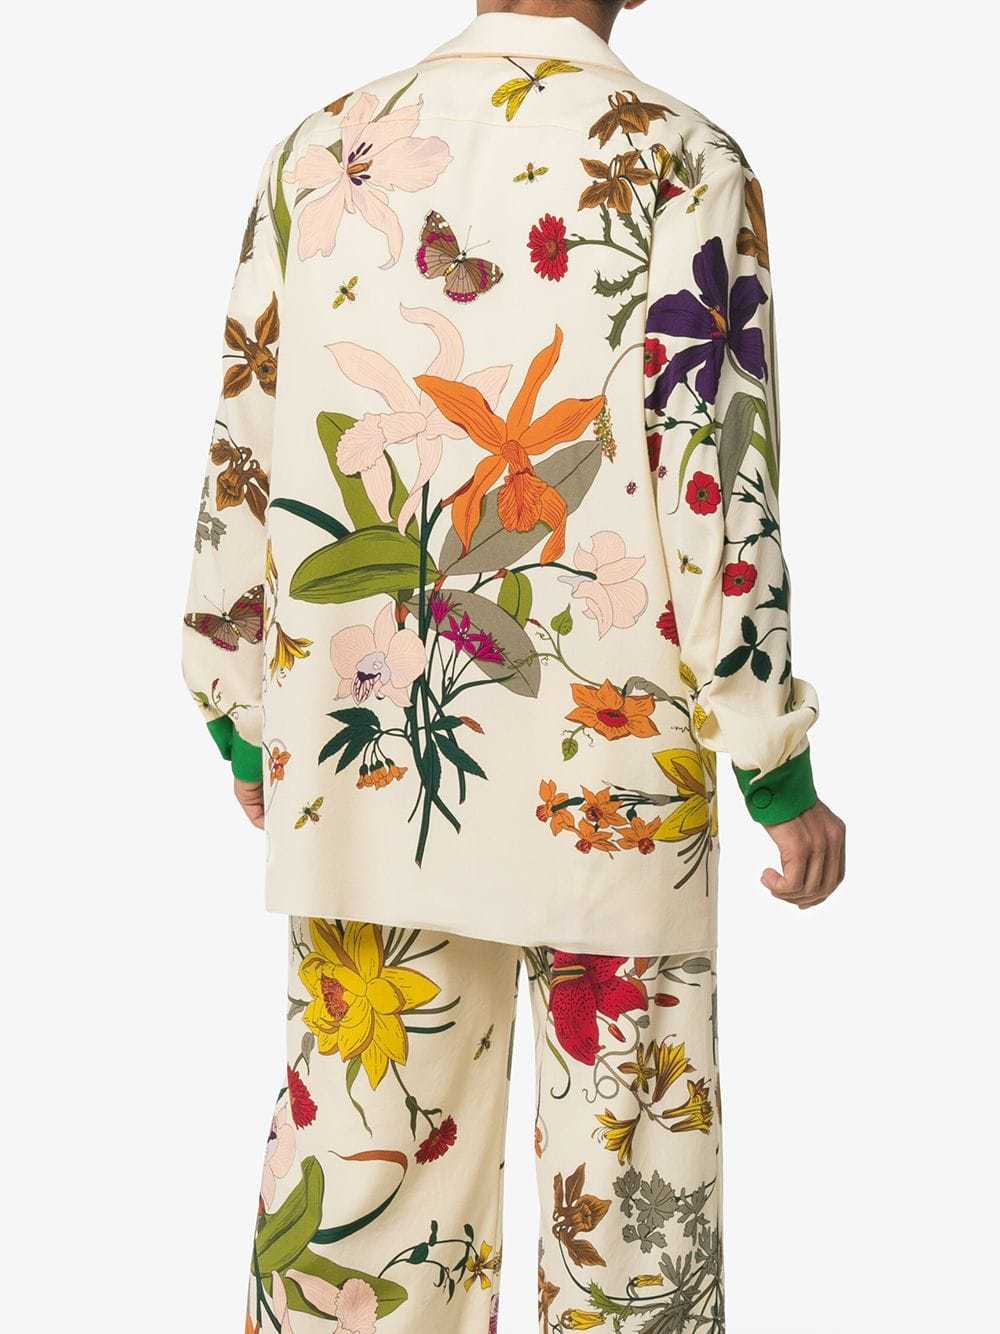 Gucci Ny Yankees Floral Print Shirt In Multicoloured